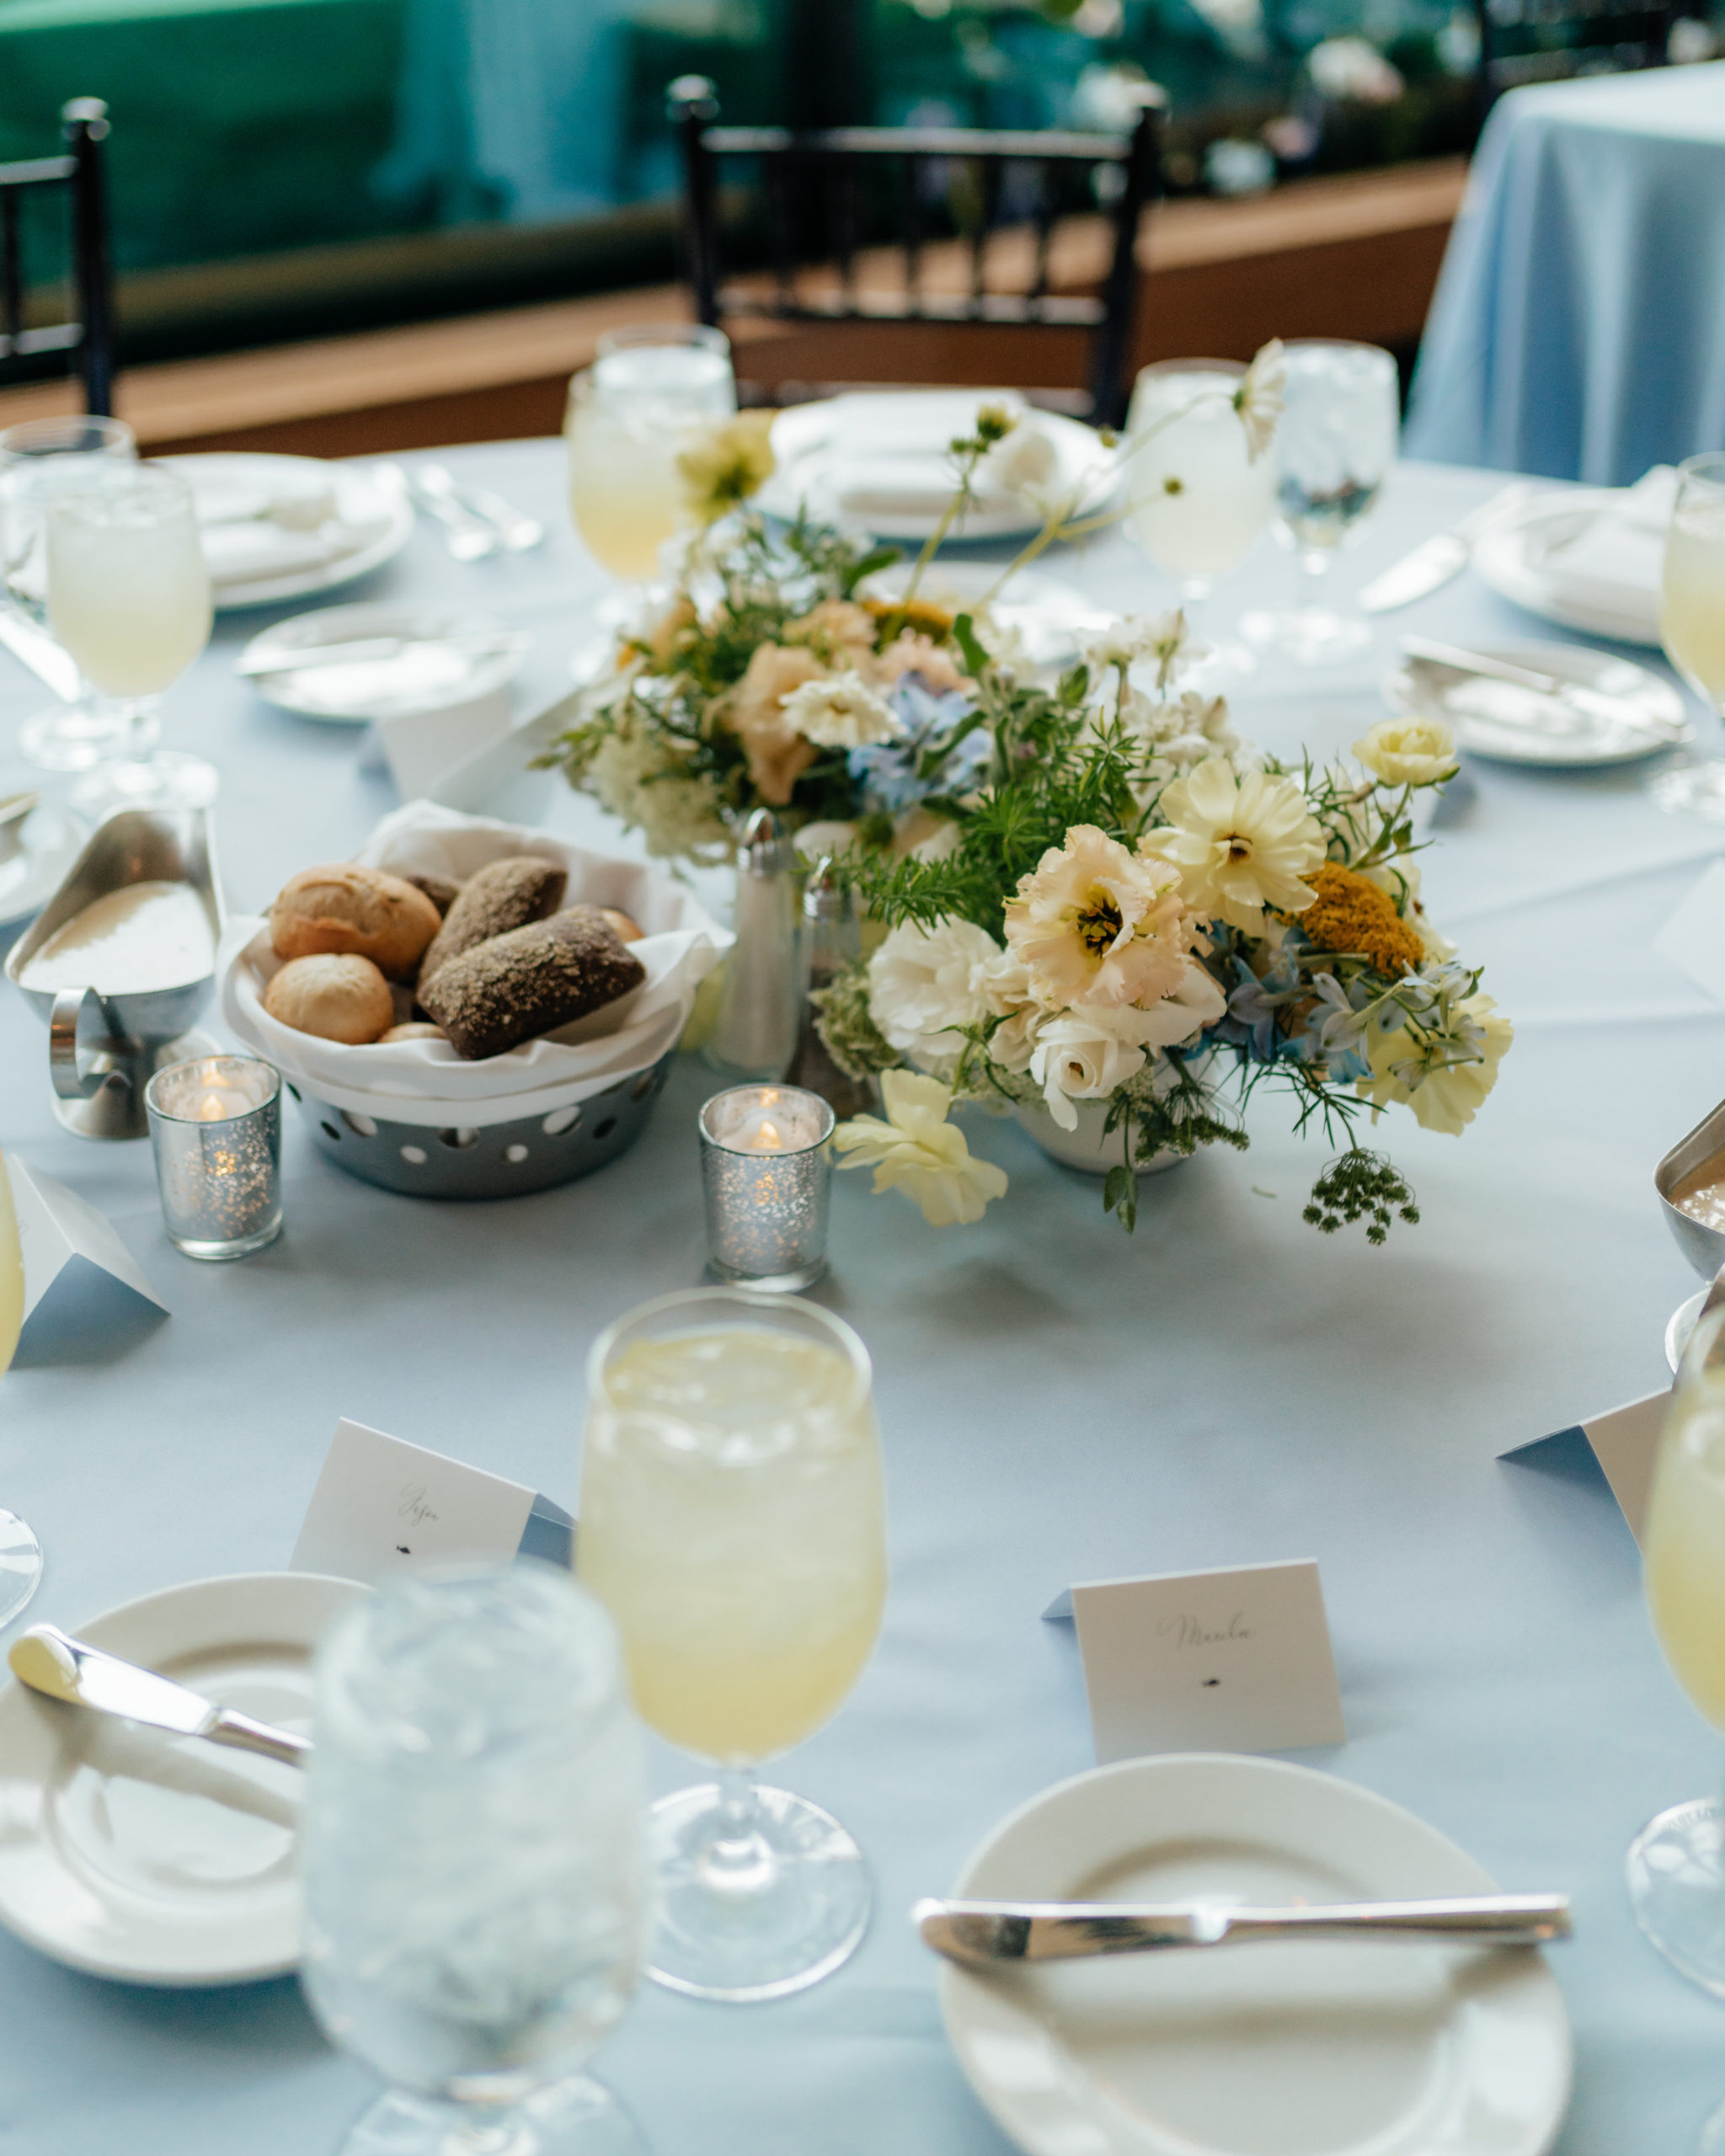 A pretty wedding centerpiece sits on a white table linen. The centerpiece has pops of soft pastel colors like light blue and yellow, giving off a wildflower vibe. Next to the flowers is a basket of rolls and light yellow lemonade in a glass.